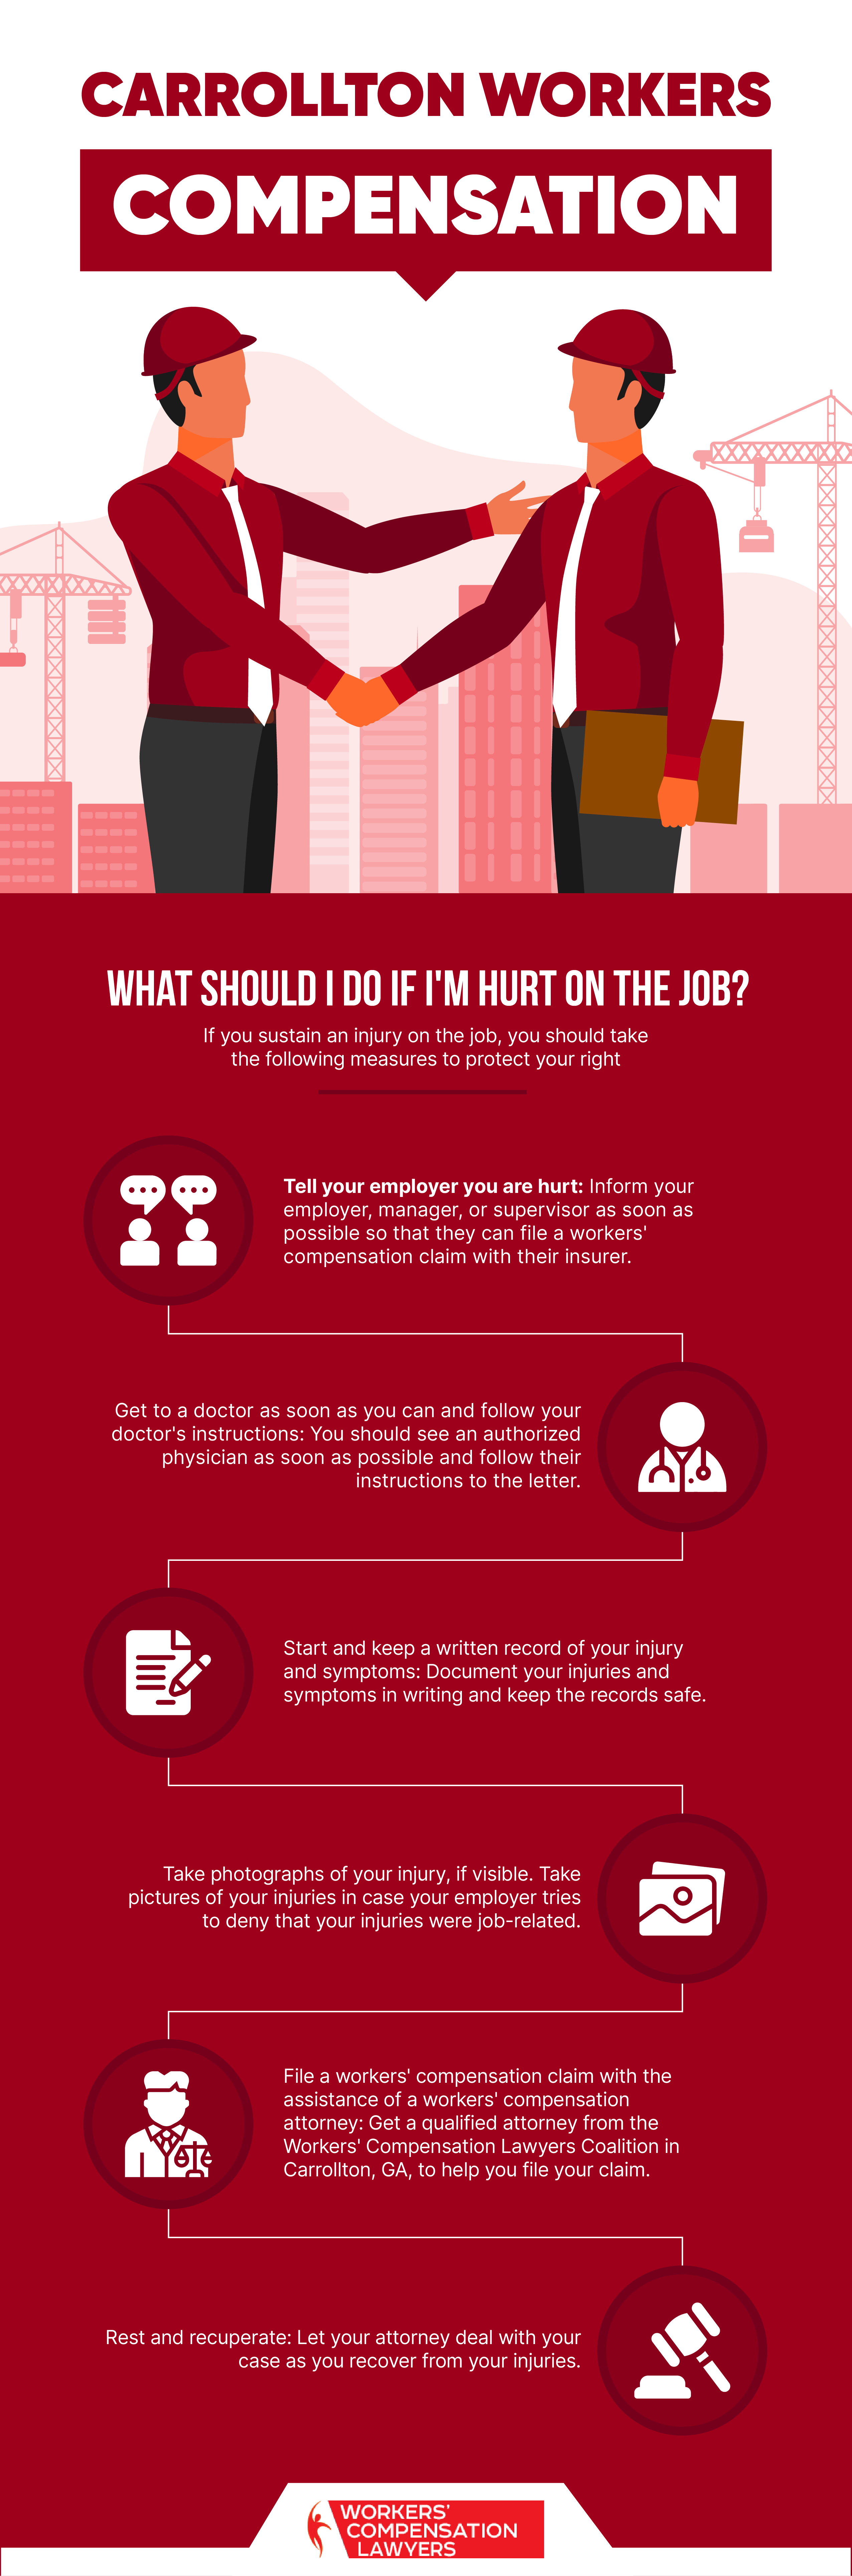 Carrollton Workers Compensation Infographic